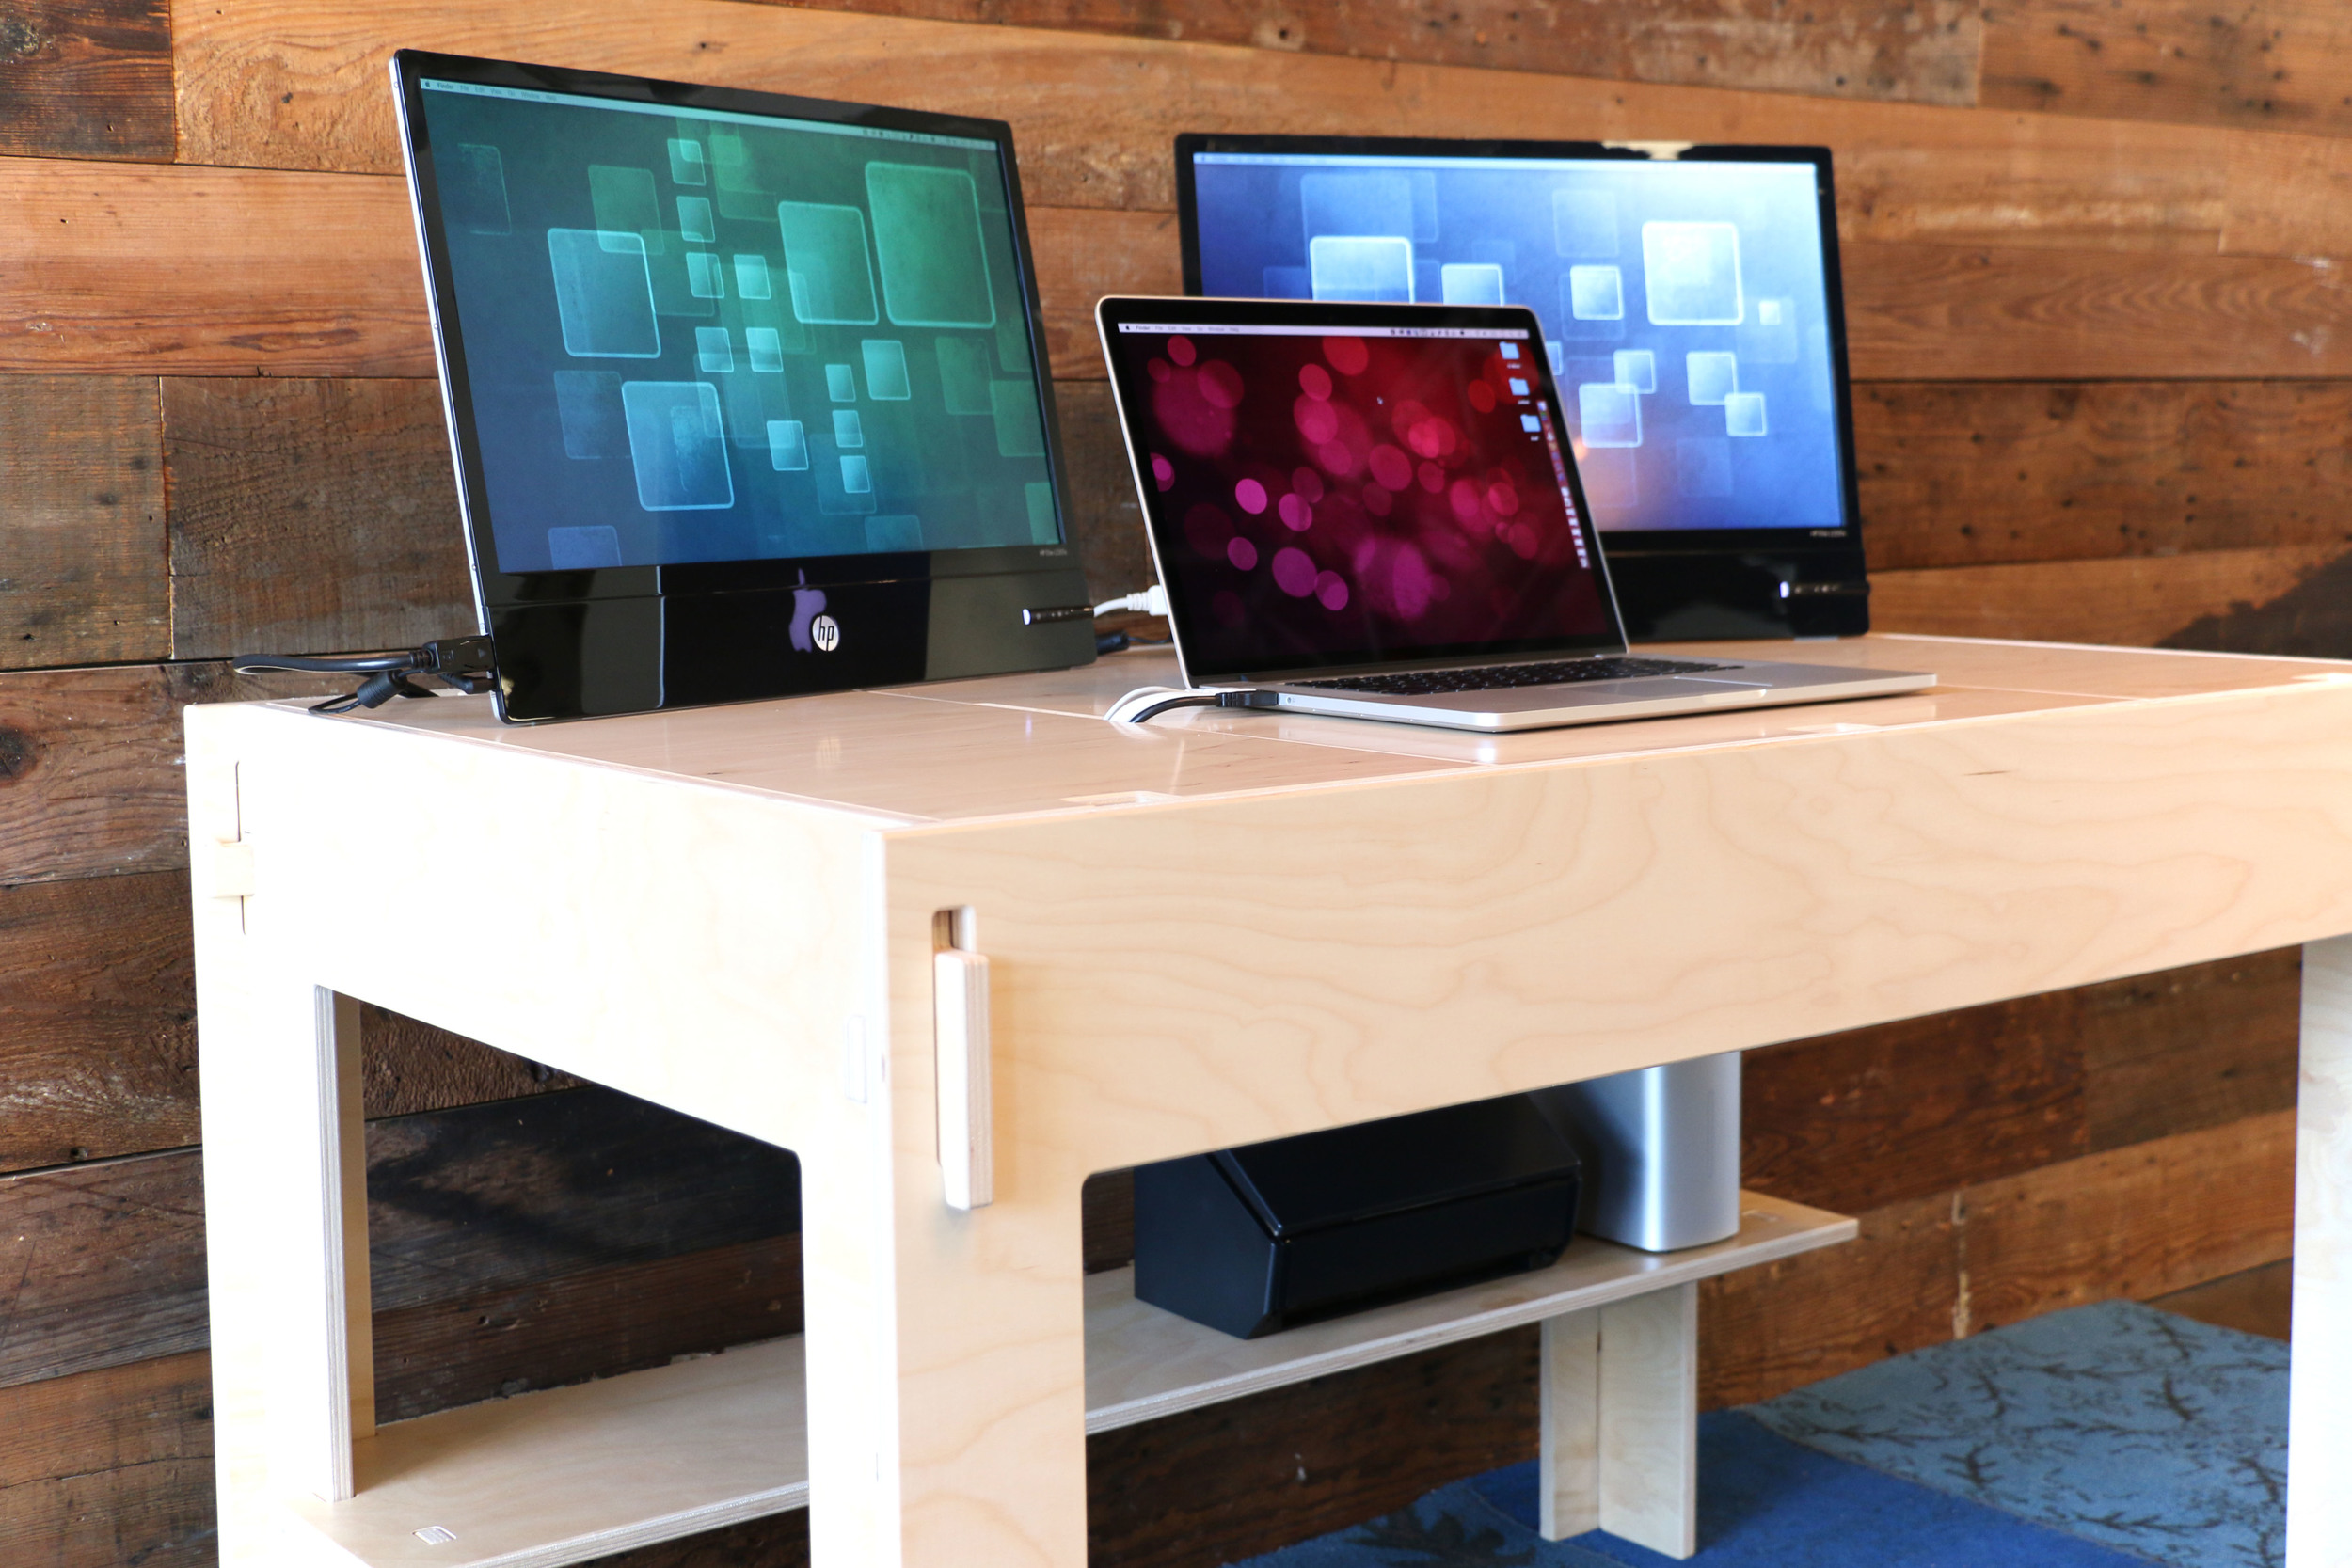  Storage-Top Desk for Mac with 15" MacBook Pro&nbsp;and two external 21" displays 